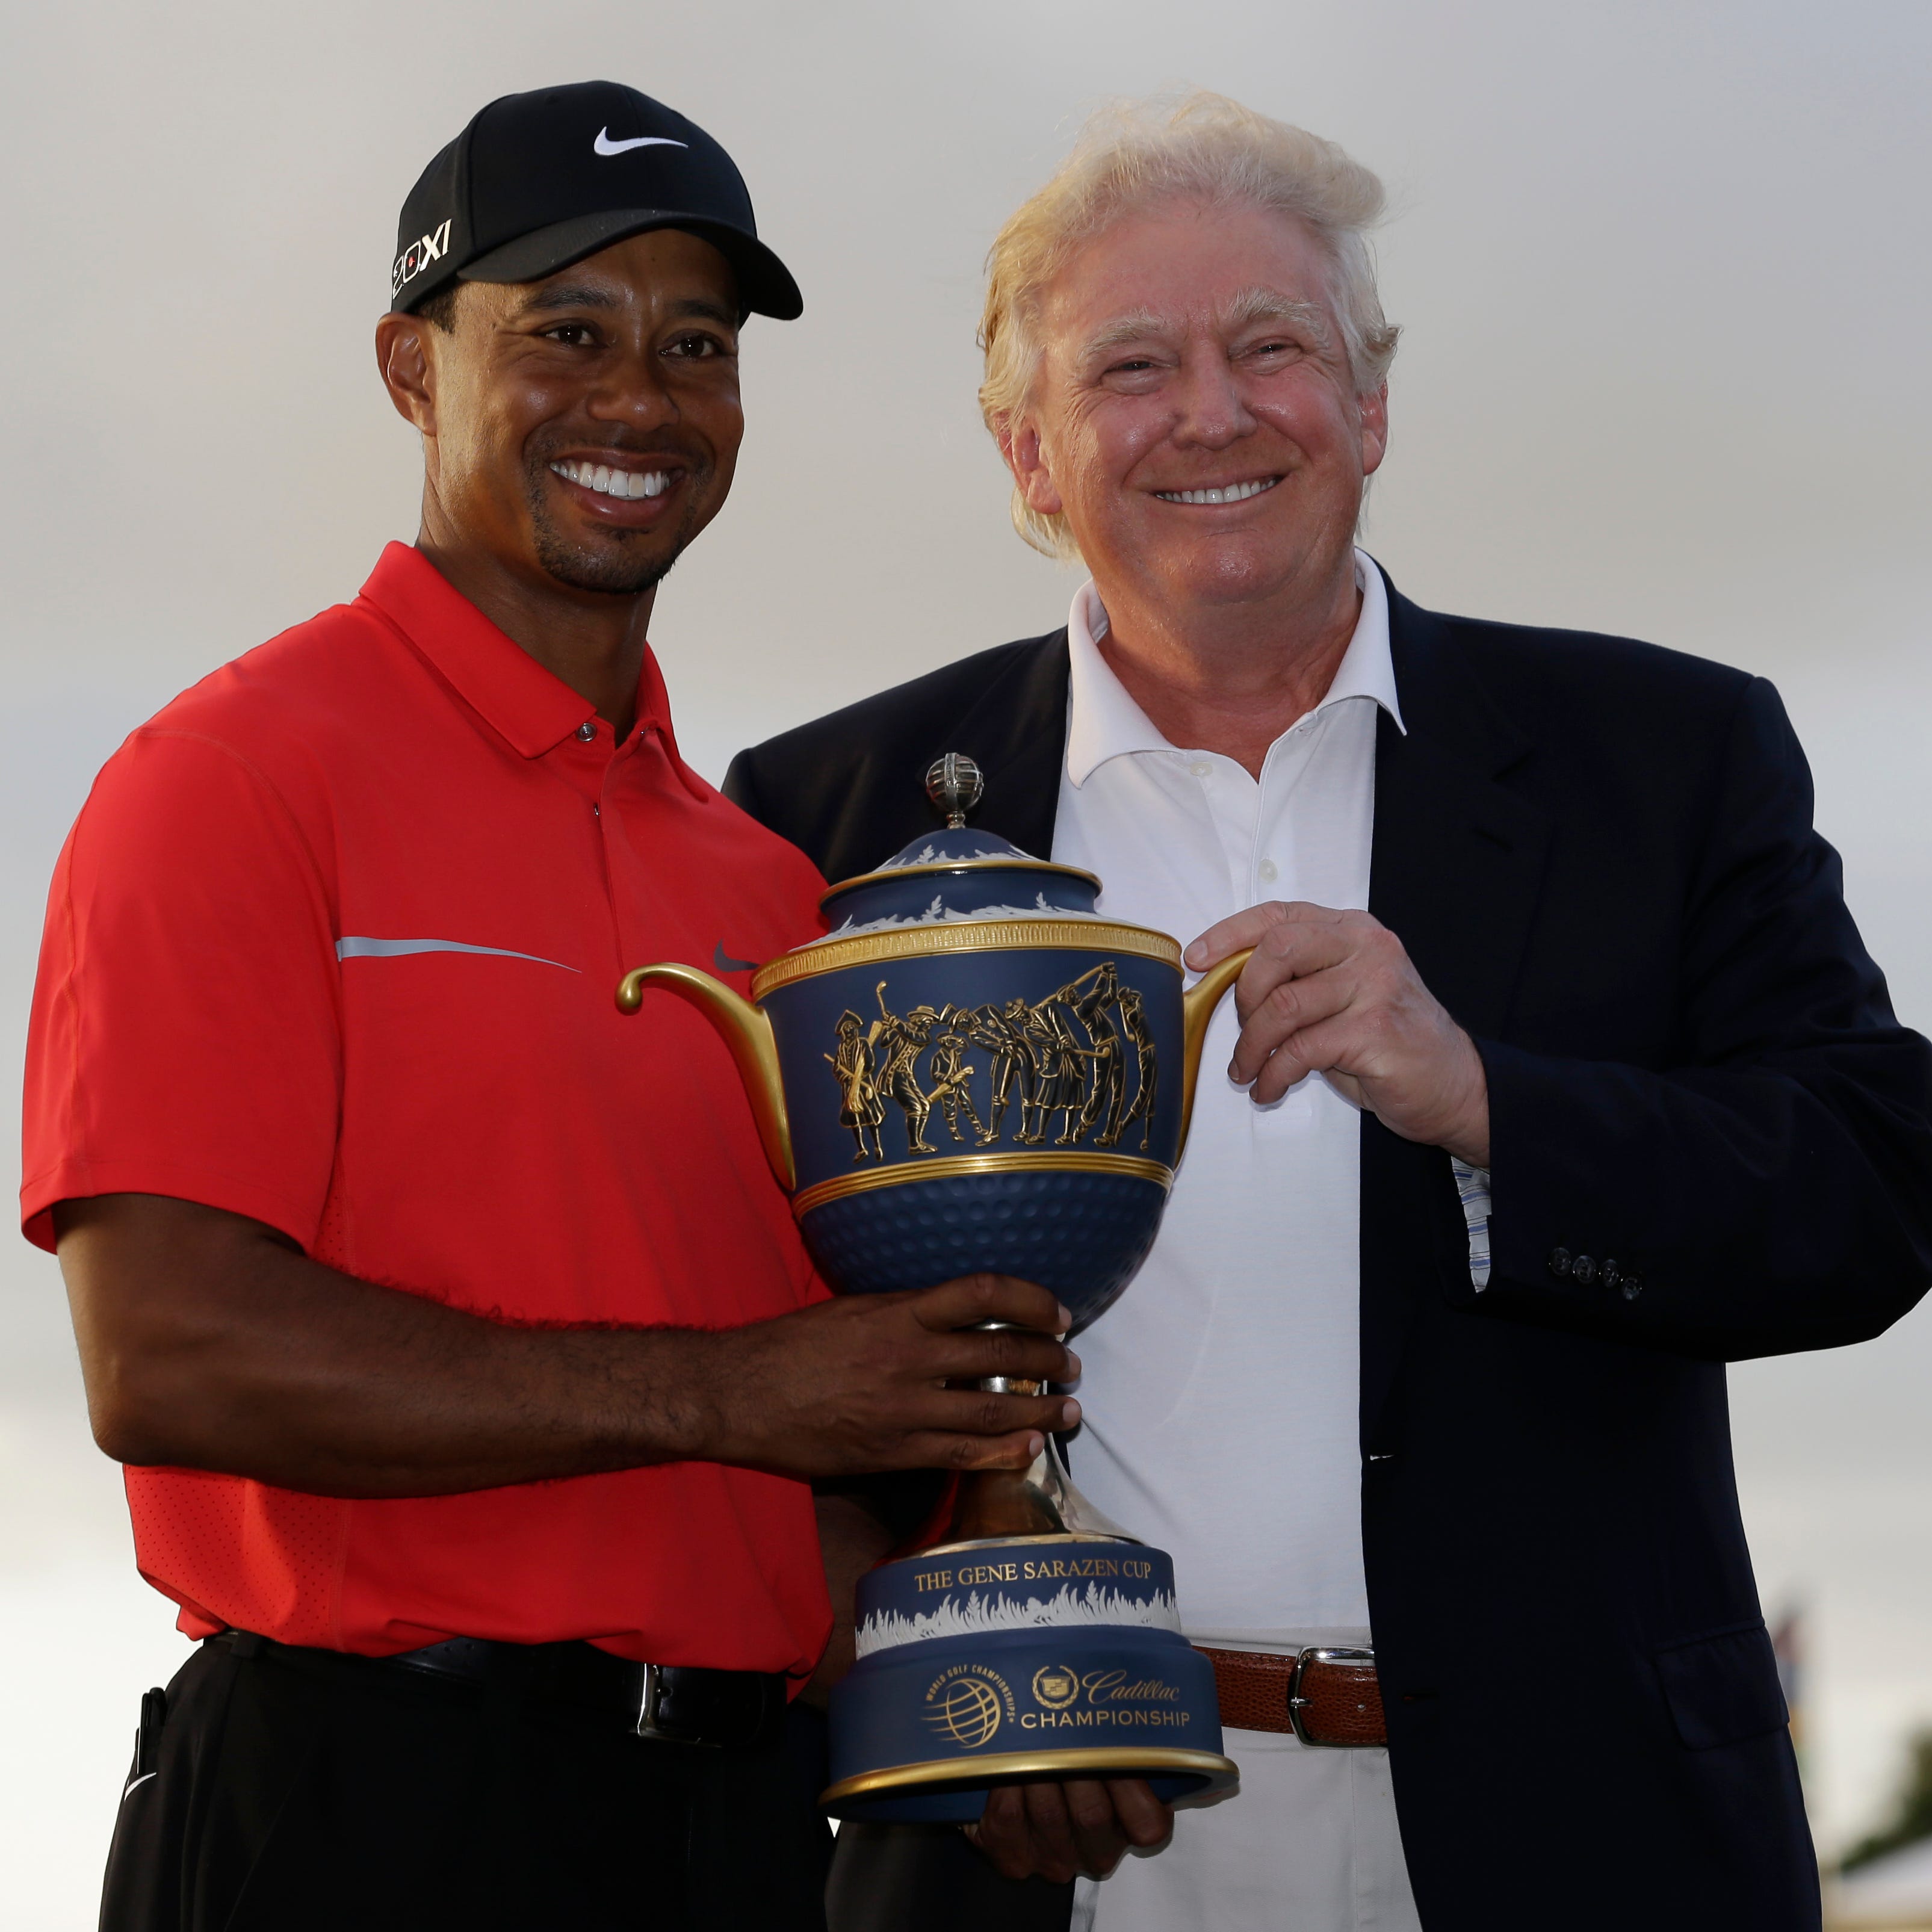 In a file photo from 2013, Tiger Woods stands with Donald Trump as he holds the Gene Serazen Cup for winning the Cadillac Championship in Doral, Fla.